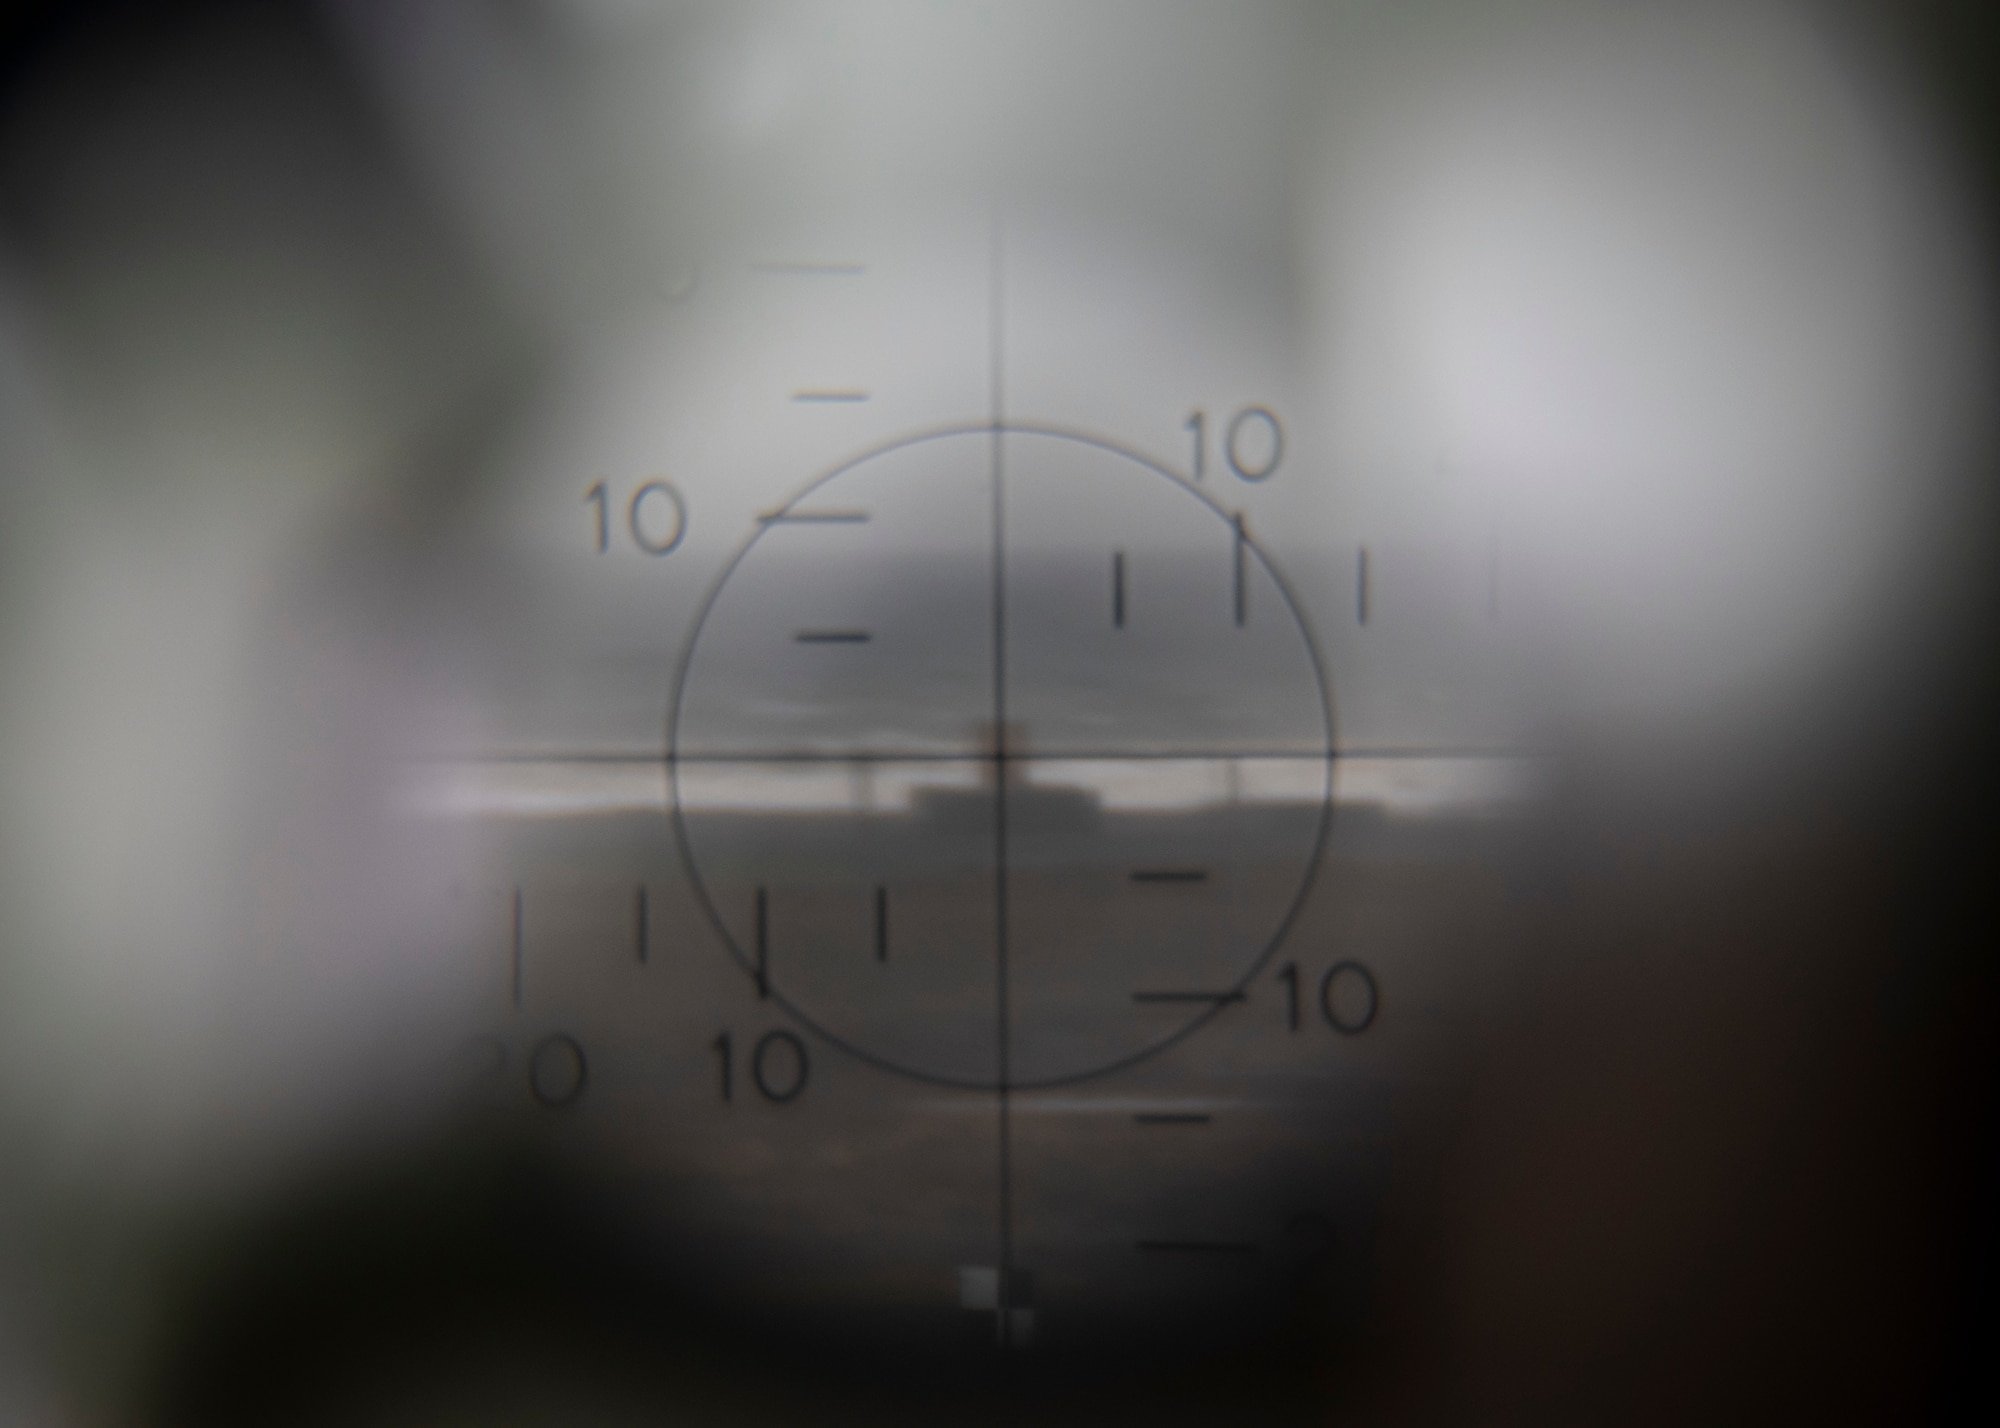 The view inside a M2A2 aiming scope at Draughon Range near Misawa Air Base, Japan, May 20, 2020. The image depicts the F-16 Fighting Falcon’s impact point when dropping inert munitions. This premier range allows military forces to safely employ inert munitions, enhancing the readiness of Misawa’s F-16 Fight Falcon pilots and other U.S. personnel to maintain the defense of Japan. Draughon Range provides realistic training for pilots by simulating enemy detection and attacks with threat emitters. (U.S. Air Force photo by Airman 1st Class China M. Shock)